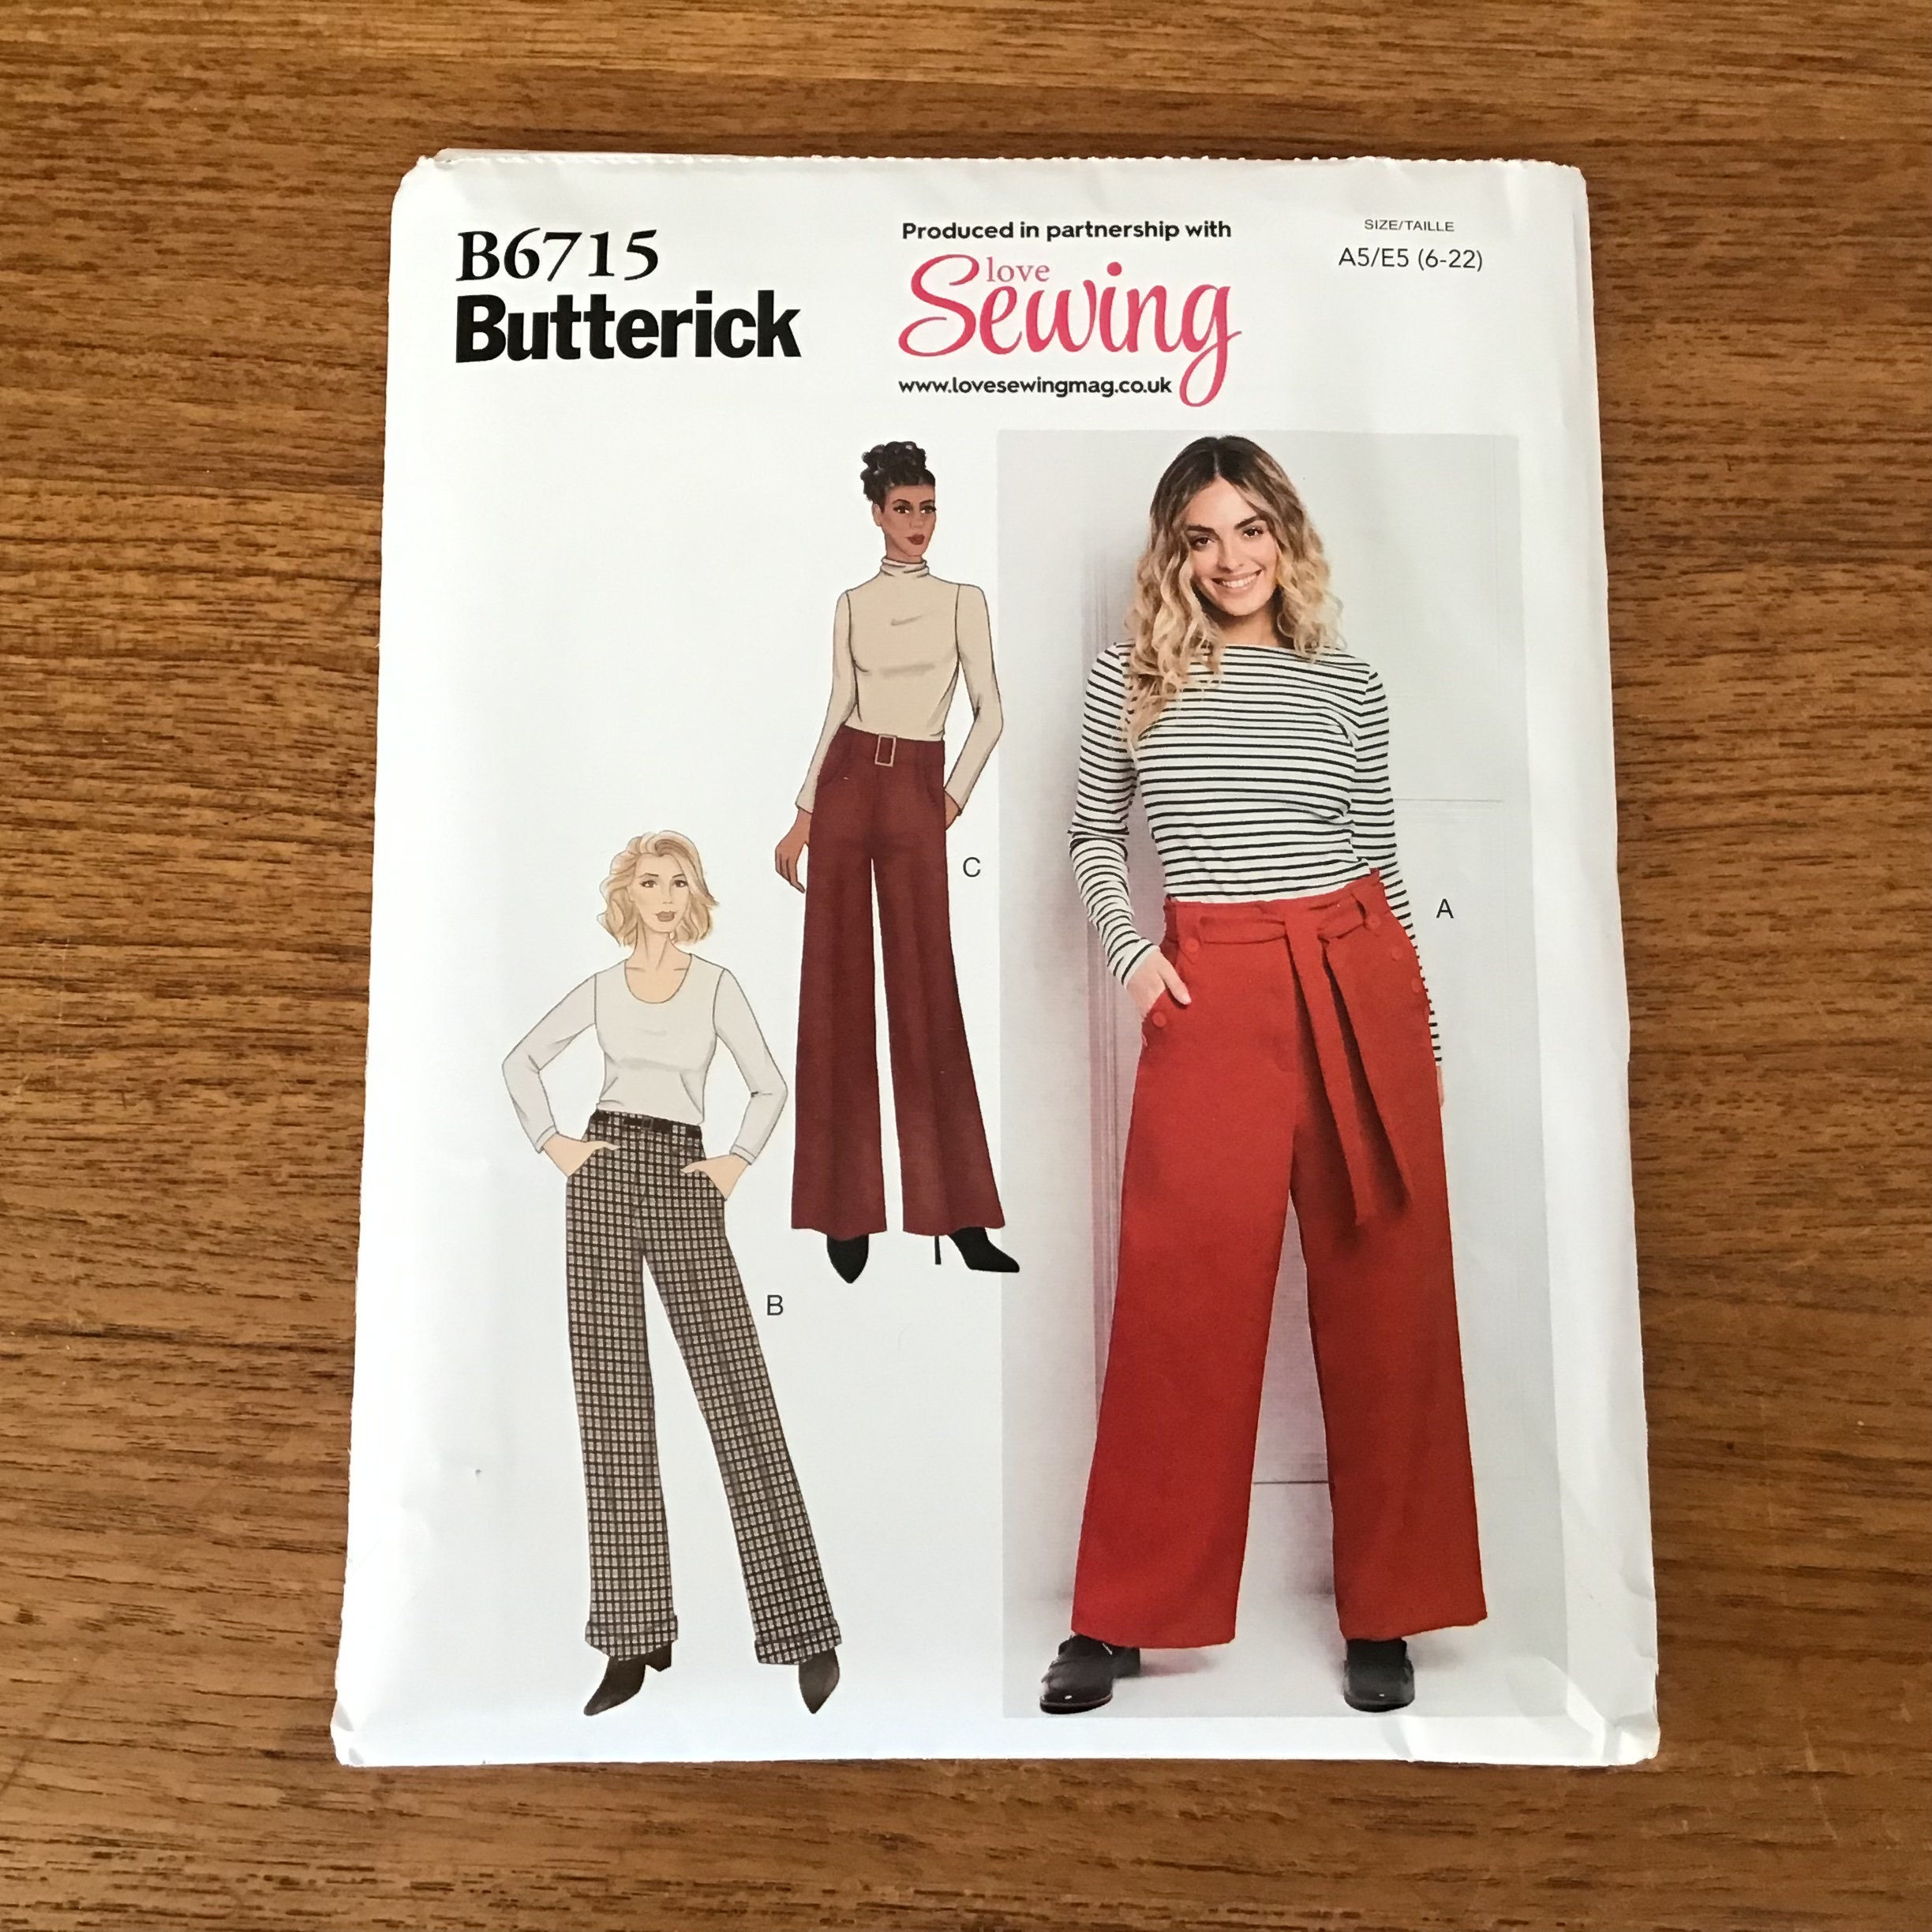 Women's 1970's Maxi Dress, Top and Flared Pants Sewing Pattern Misses Size  12 UNCUT Butterick 3045